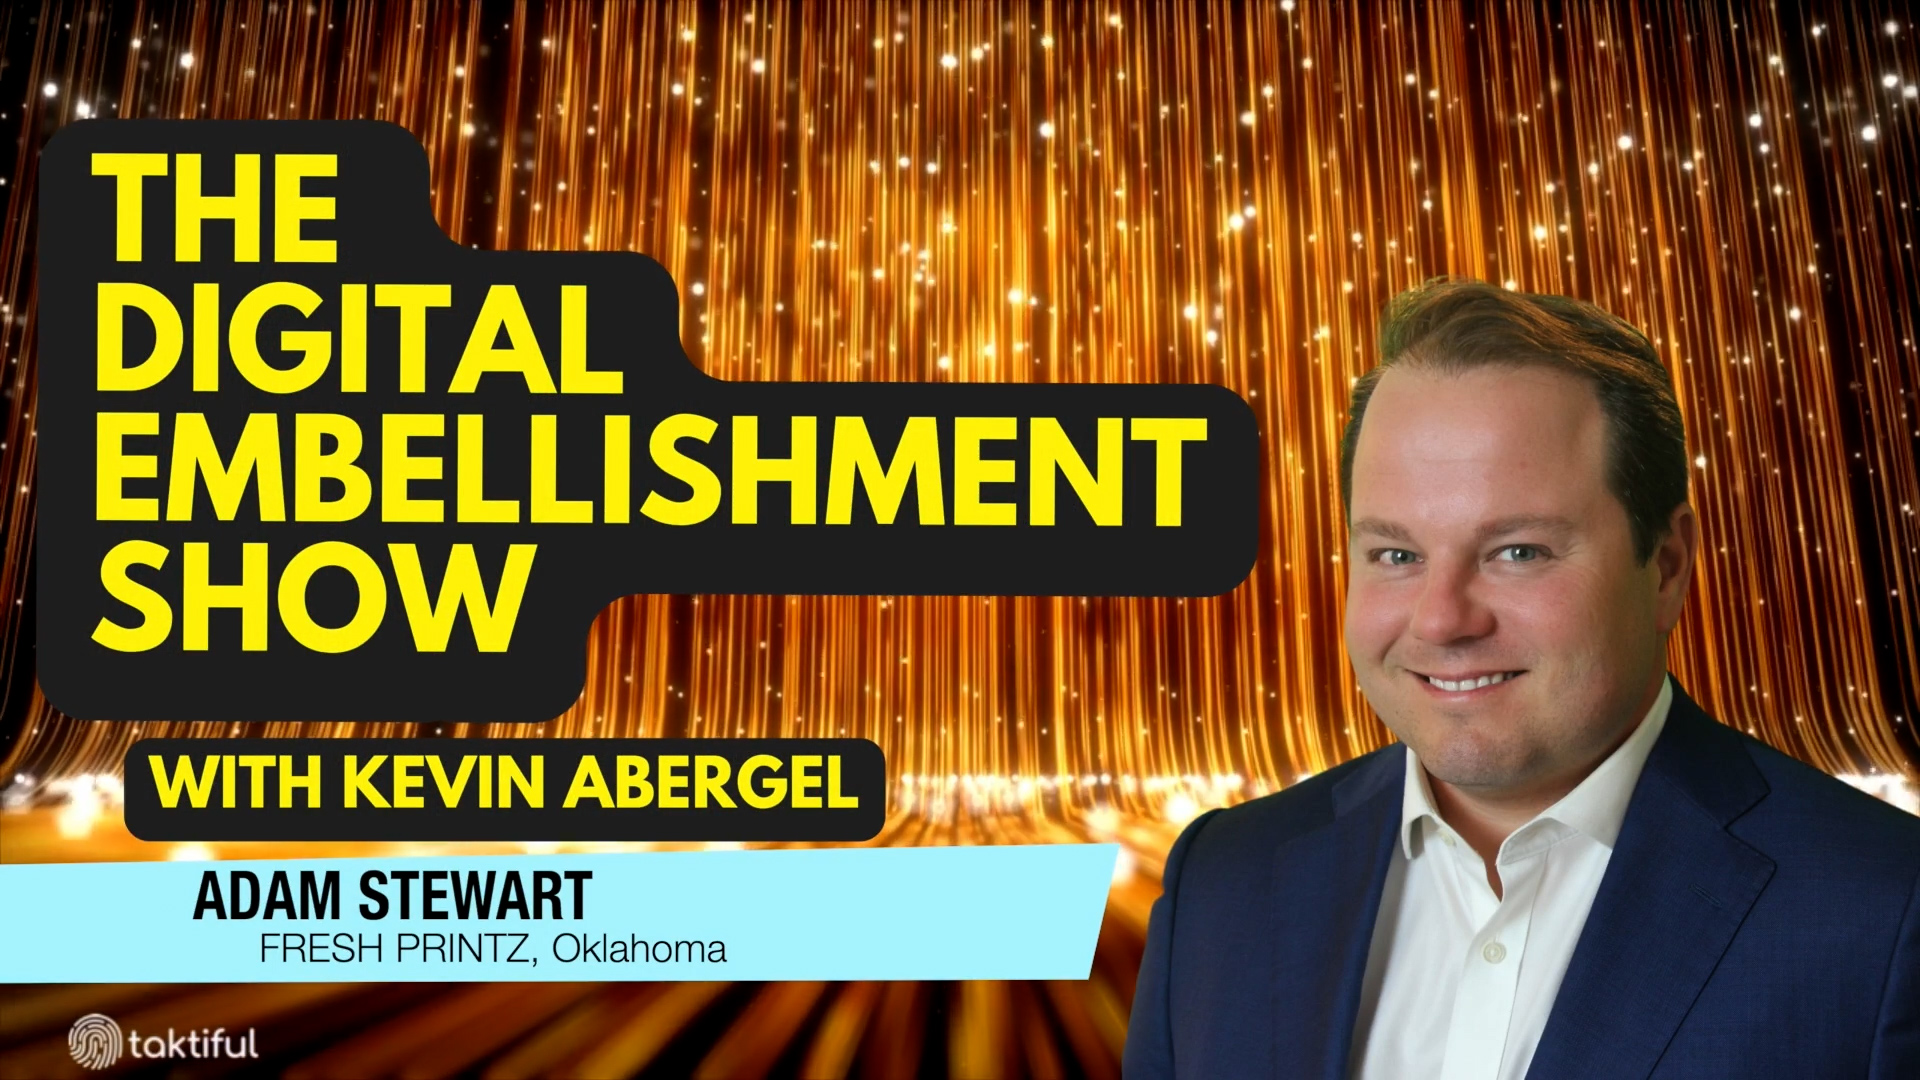 The Digital Embellishment Show with Special Guest Adam Stewart from Fresh Printz